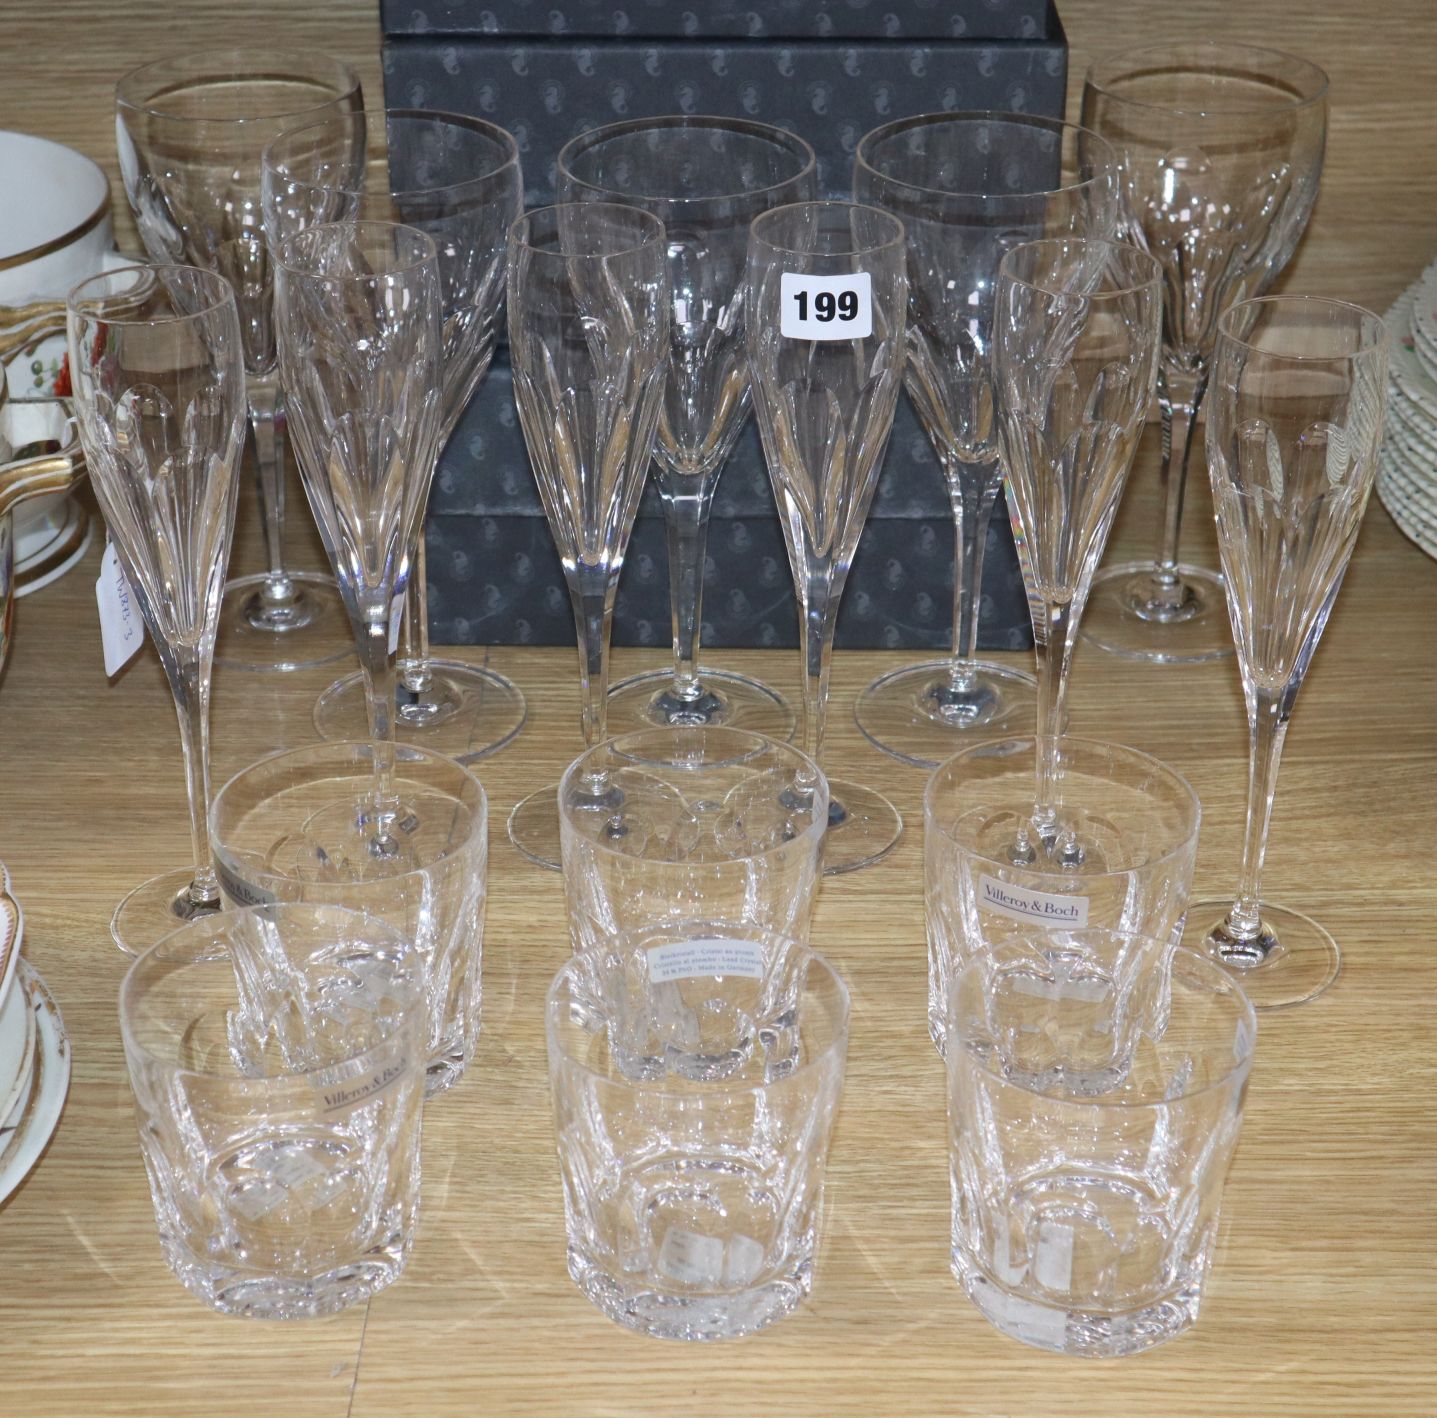 Six boxed Waterford glasses and three boxed sets of Villeroy & Boch glasses